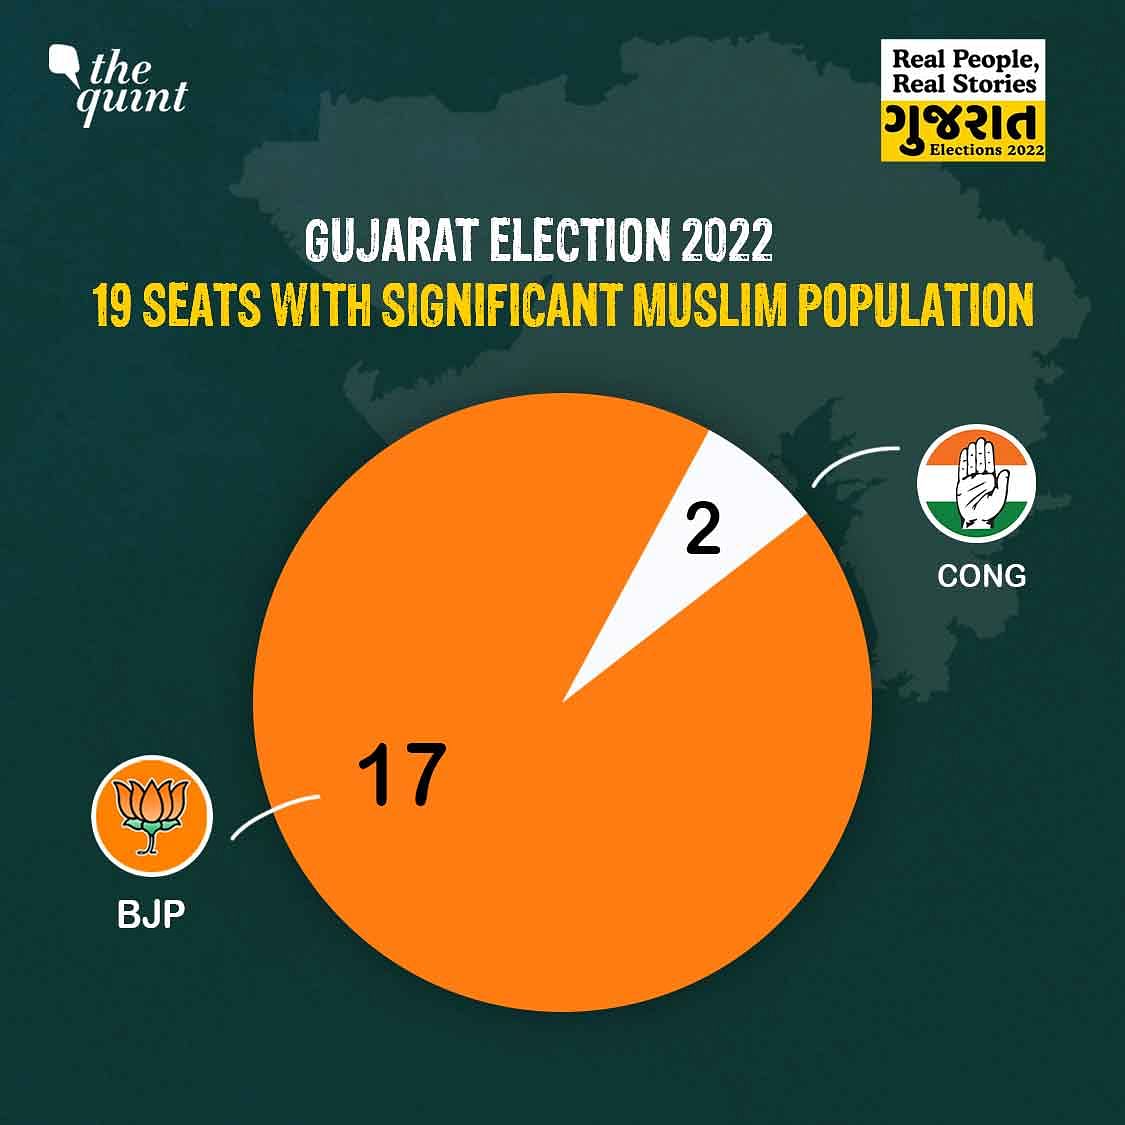 Other parties, including the AIMIM, didn't come close to the winning margin in these seats. The BJP had an easy win.